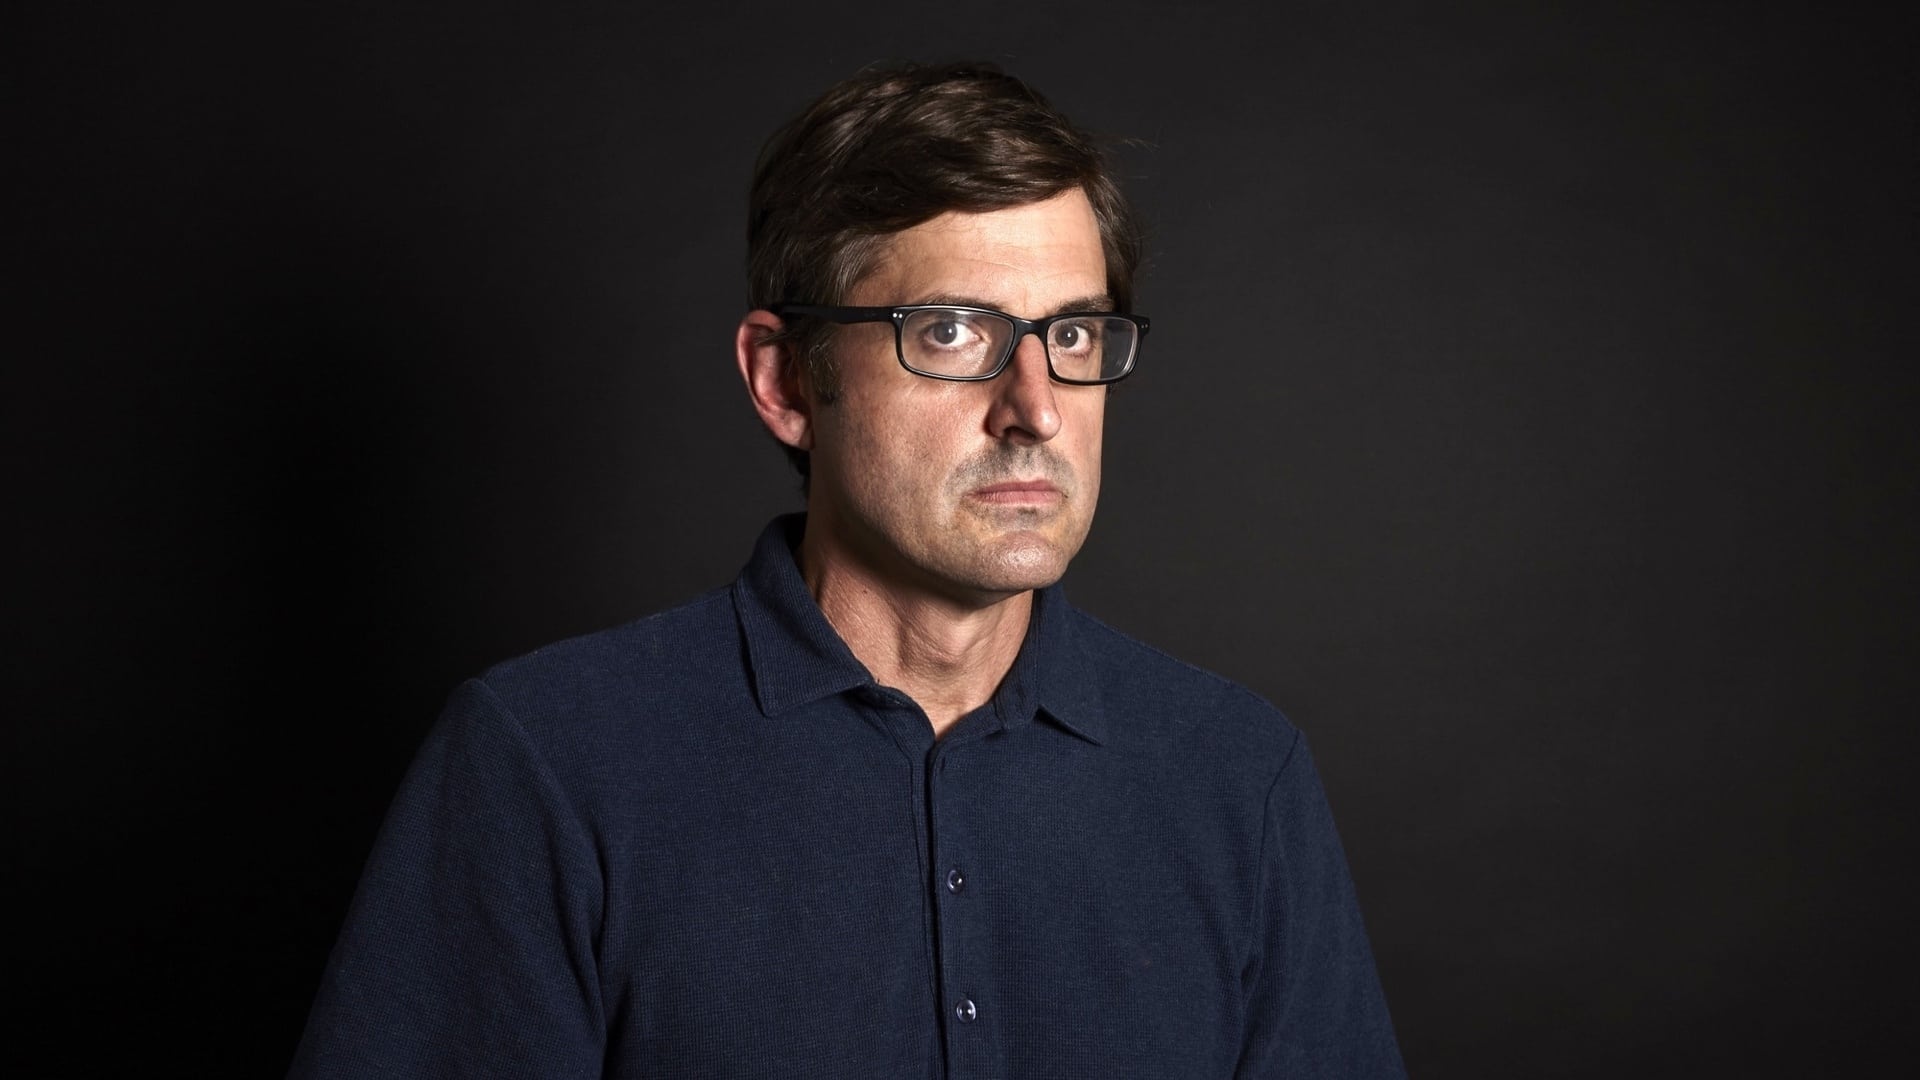 Louis Theroux: Law and Disorder in Johannesburg